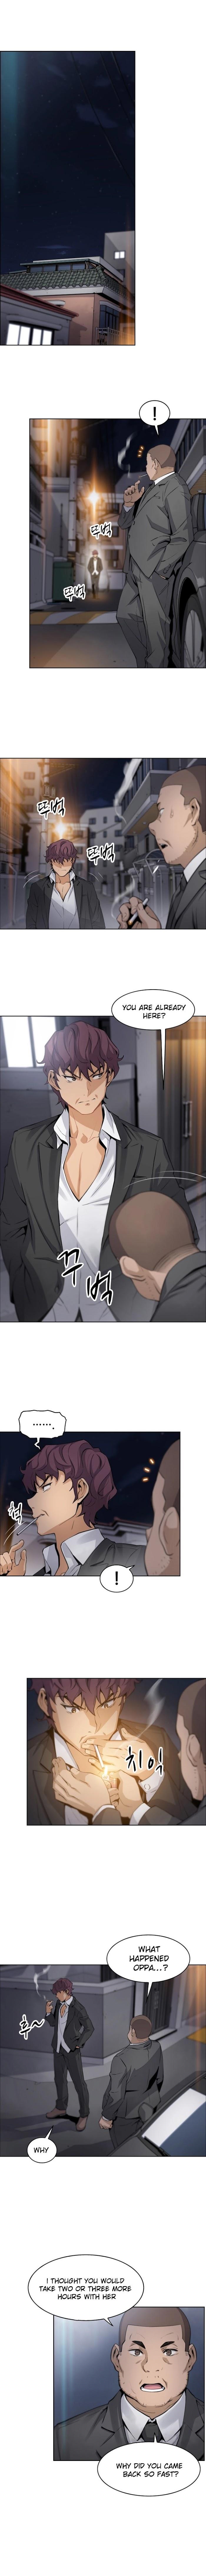 Housekeeper [Neck Pillow, Paper] Ch.49/49 [English] [Manhwa PDF] Completed 141